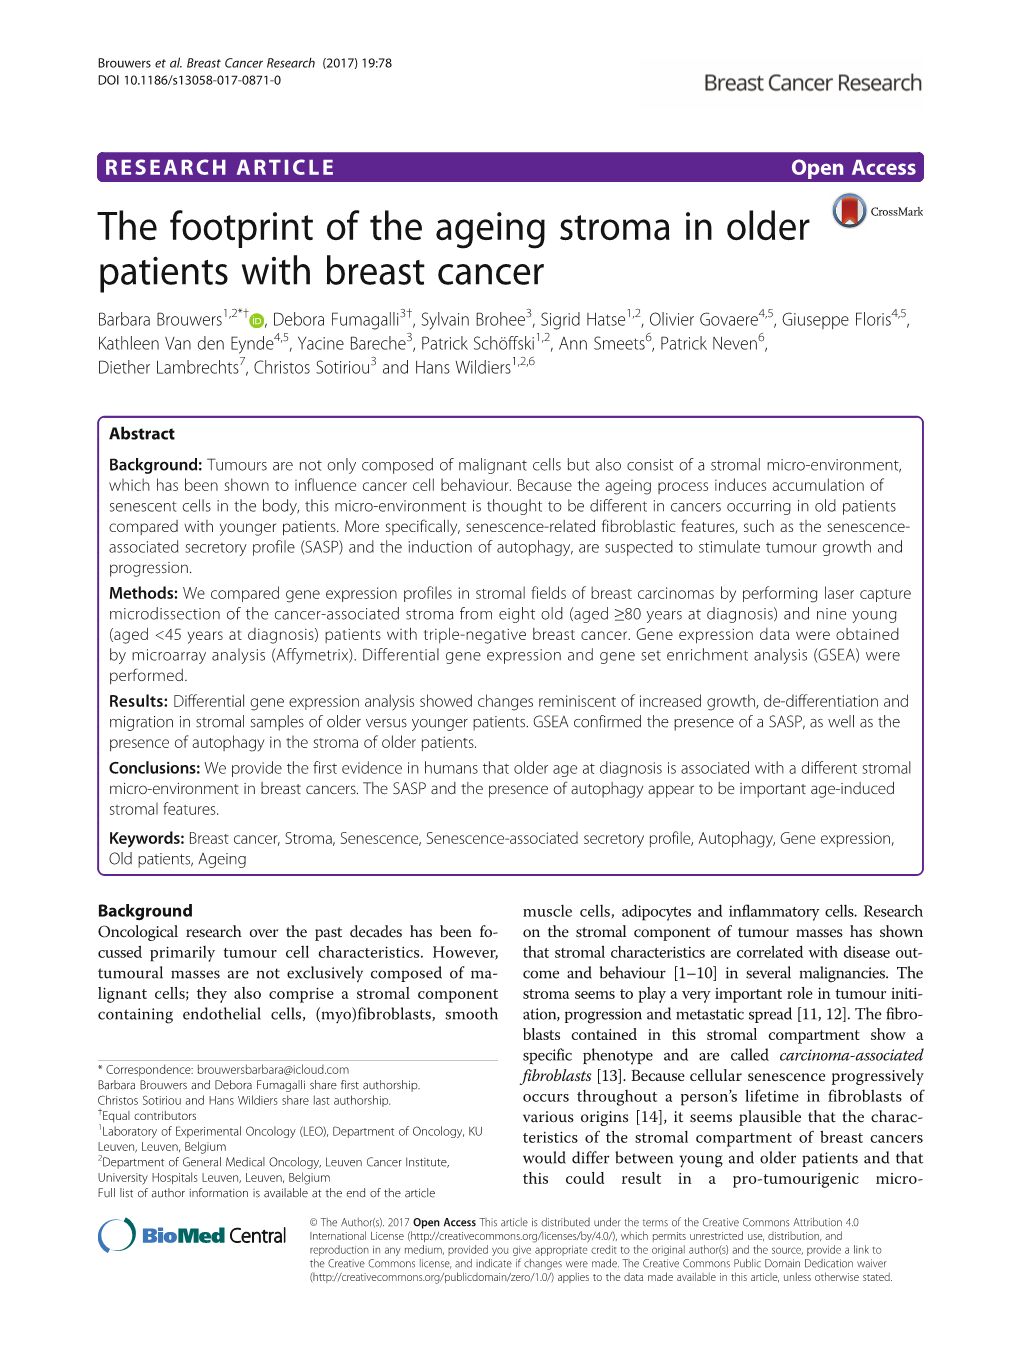 The Footprint of the Ageing Stroma in Older Patients with Breast Cancer